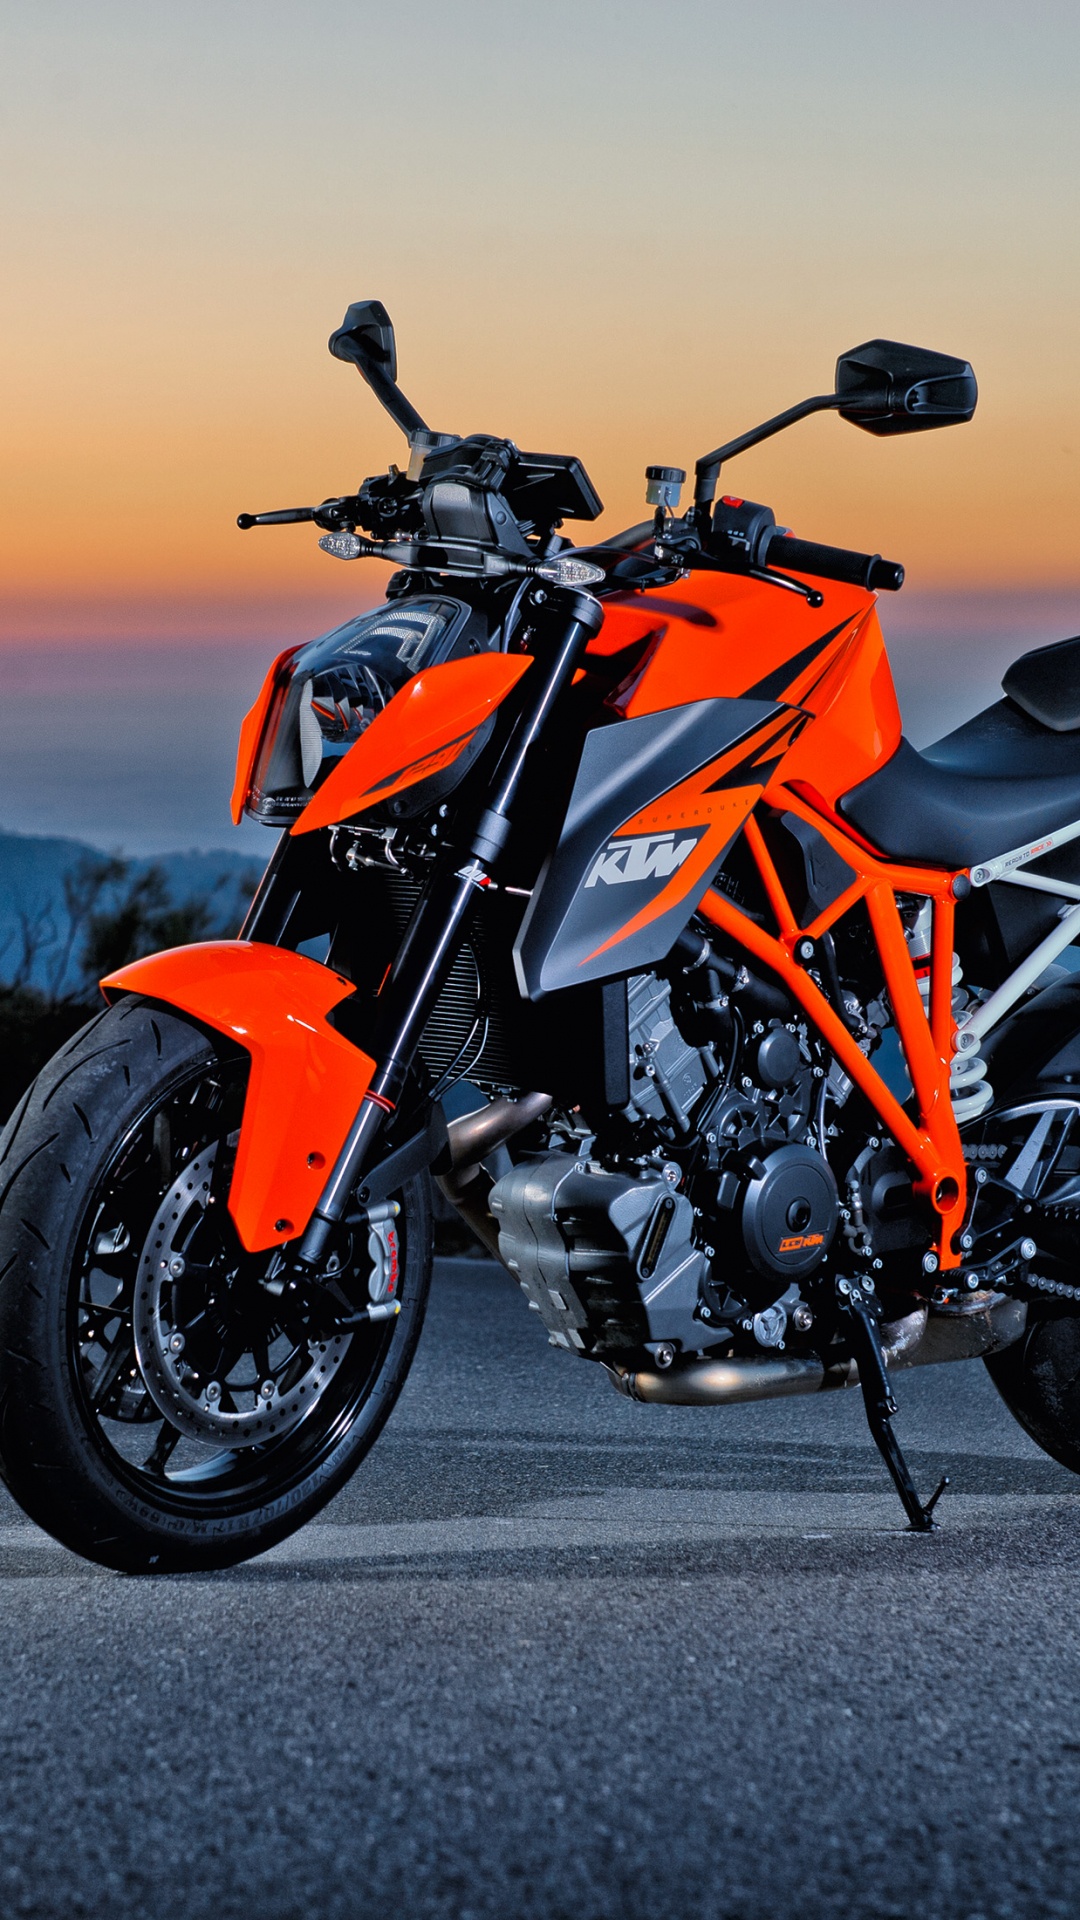 Orange and Black Sports Bike on Road During Daytime. Wallpaper in 1080x1920 Resolution